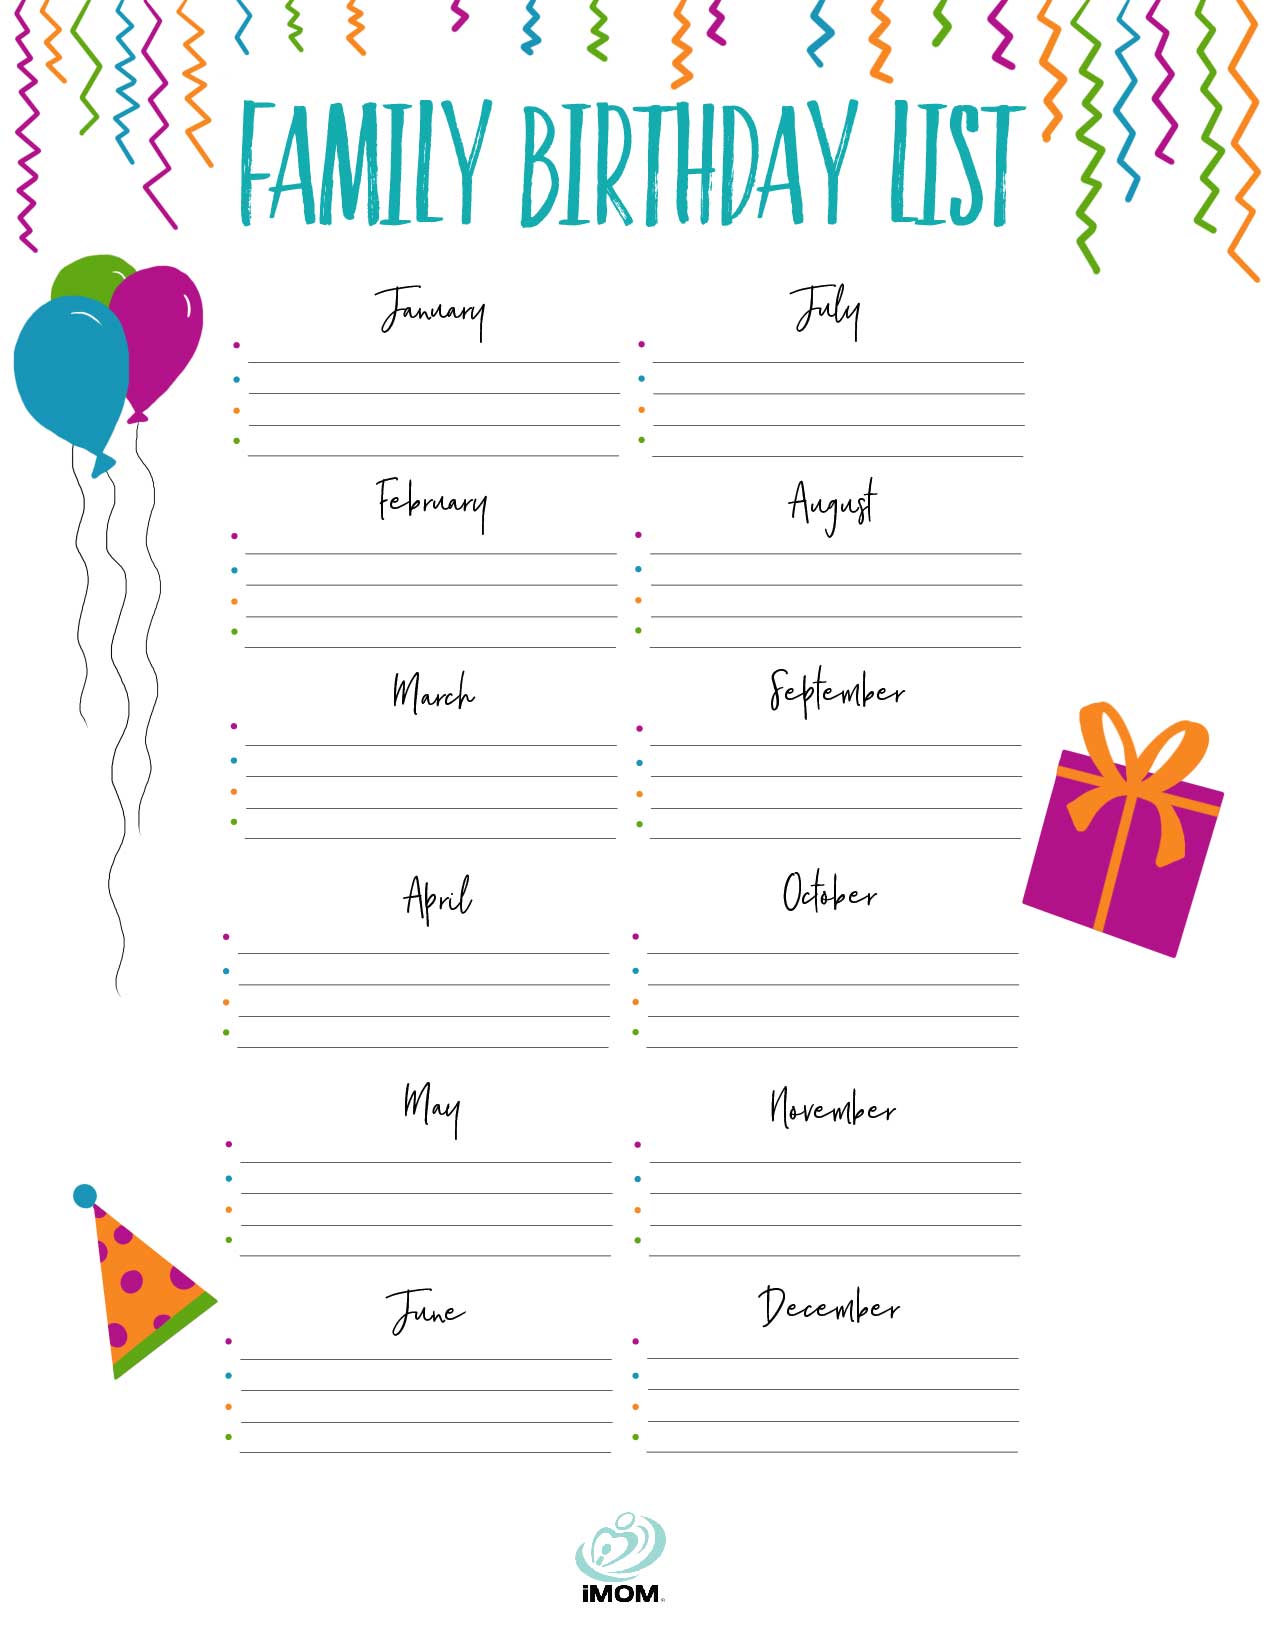 birthday-list-printable-keep-track-of-everyone-s-special-day-imom